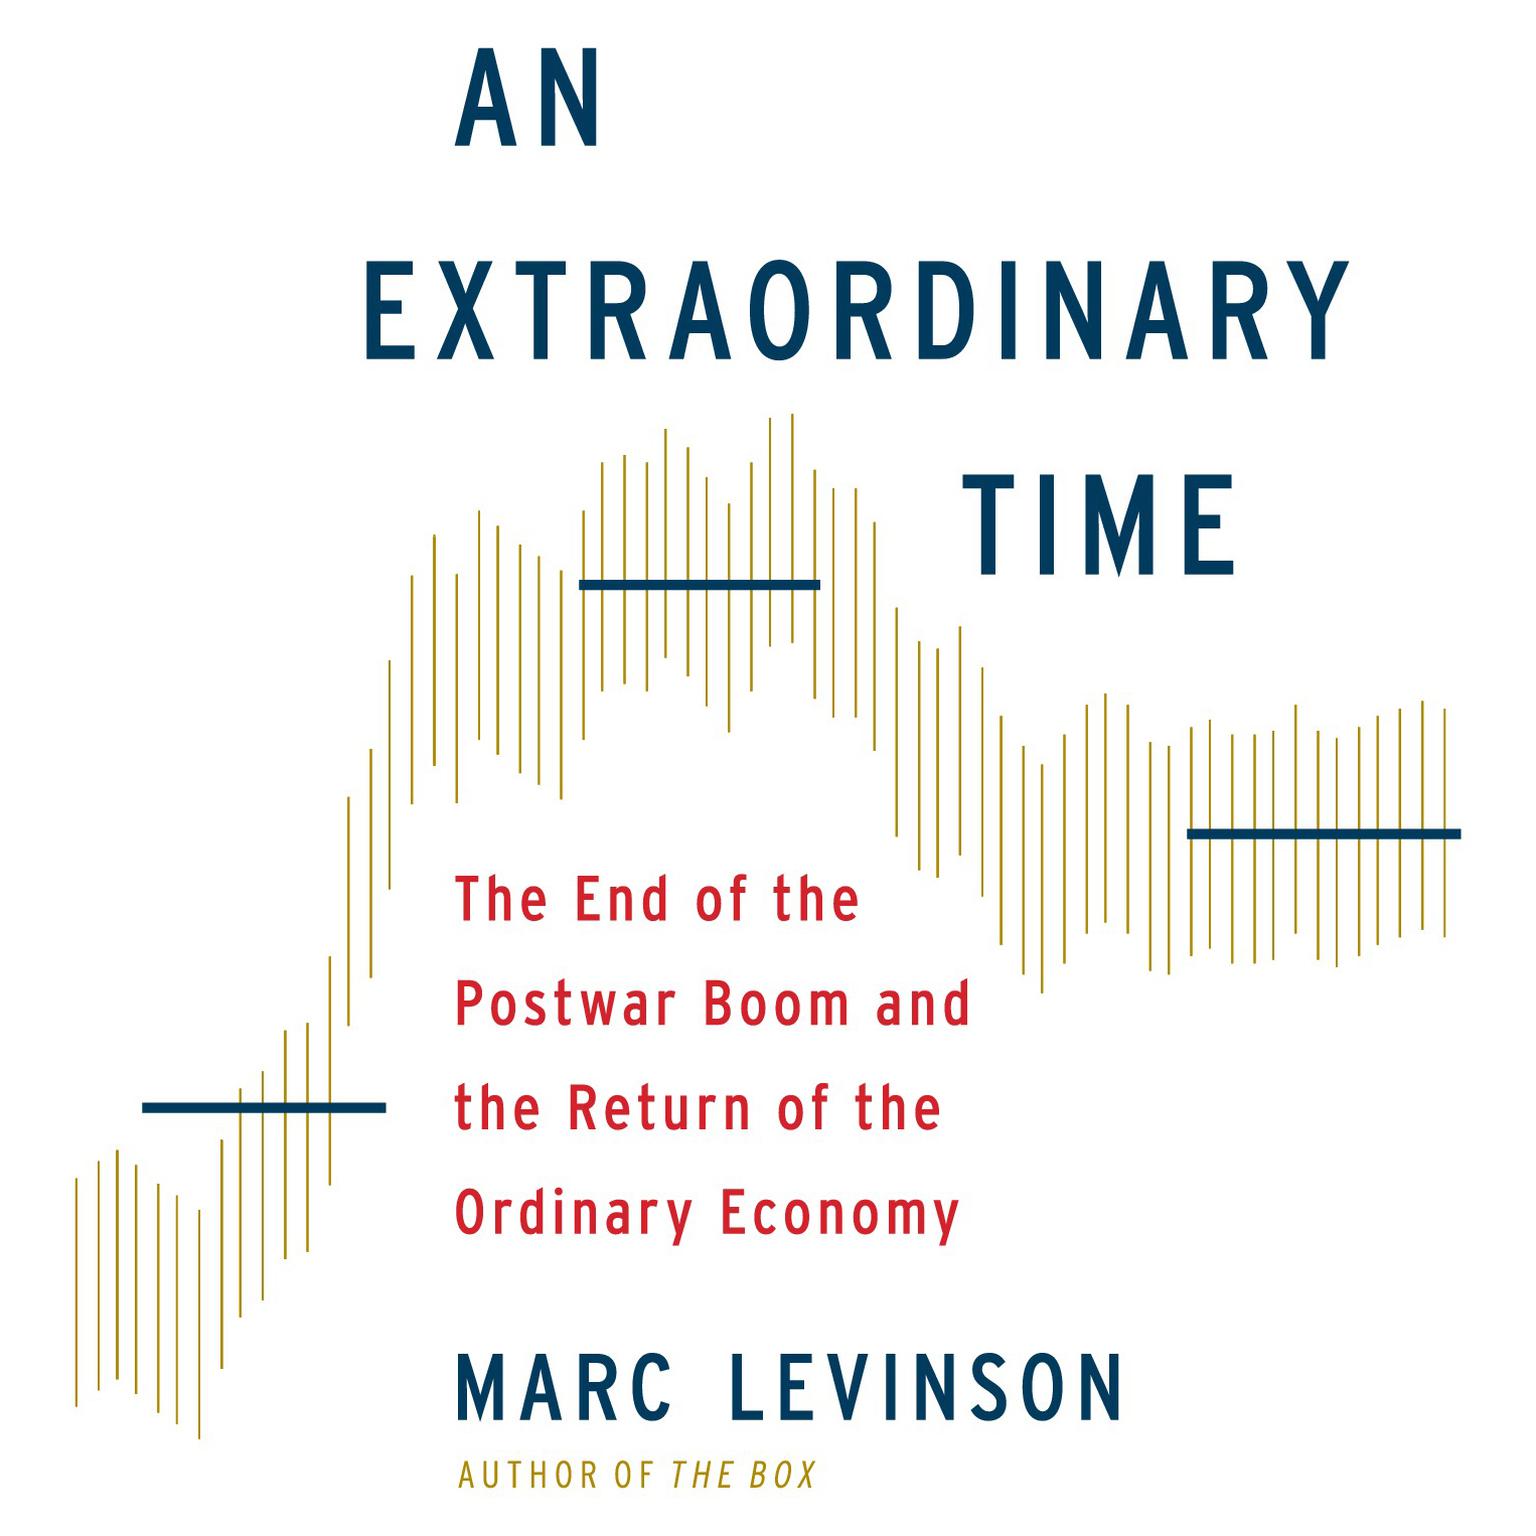 An Extraordinary Time: The End of the Postwar Boom and the Return of the Ordinary Economy Audiobook, by Marc Levinson